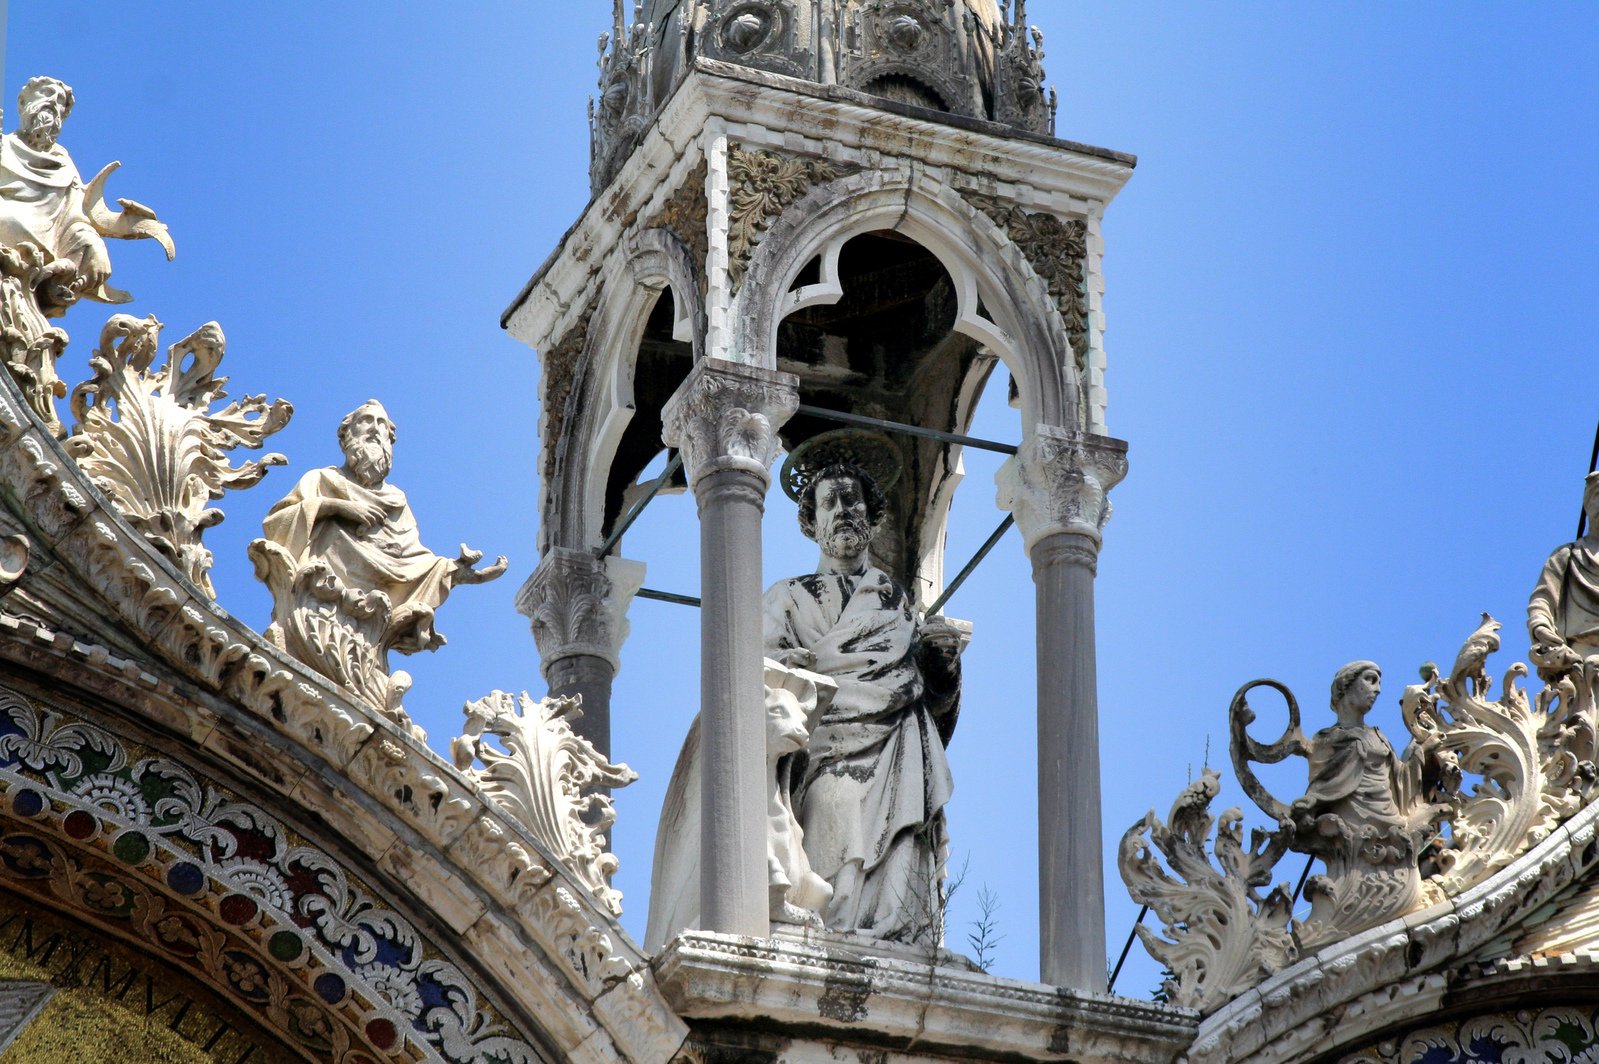 a tower has statues on it and sculptures and a clock